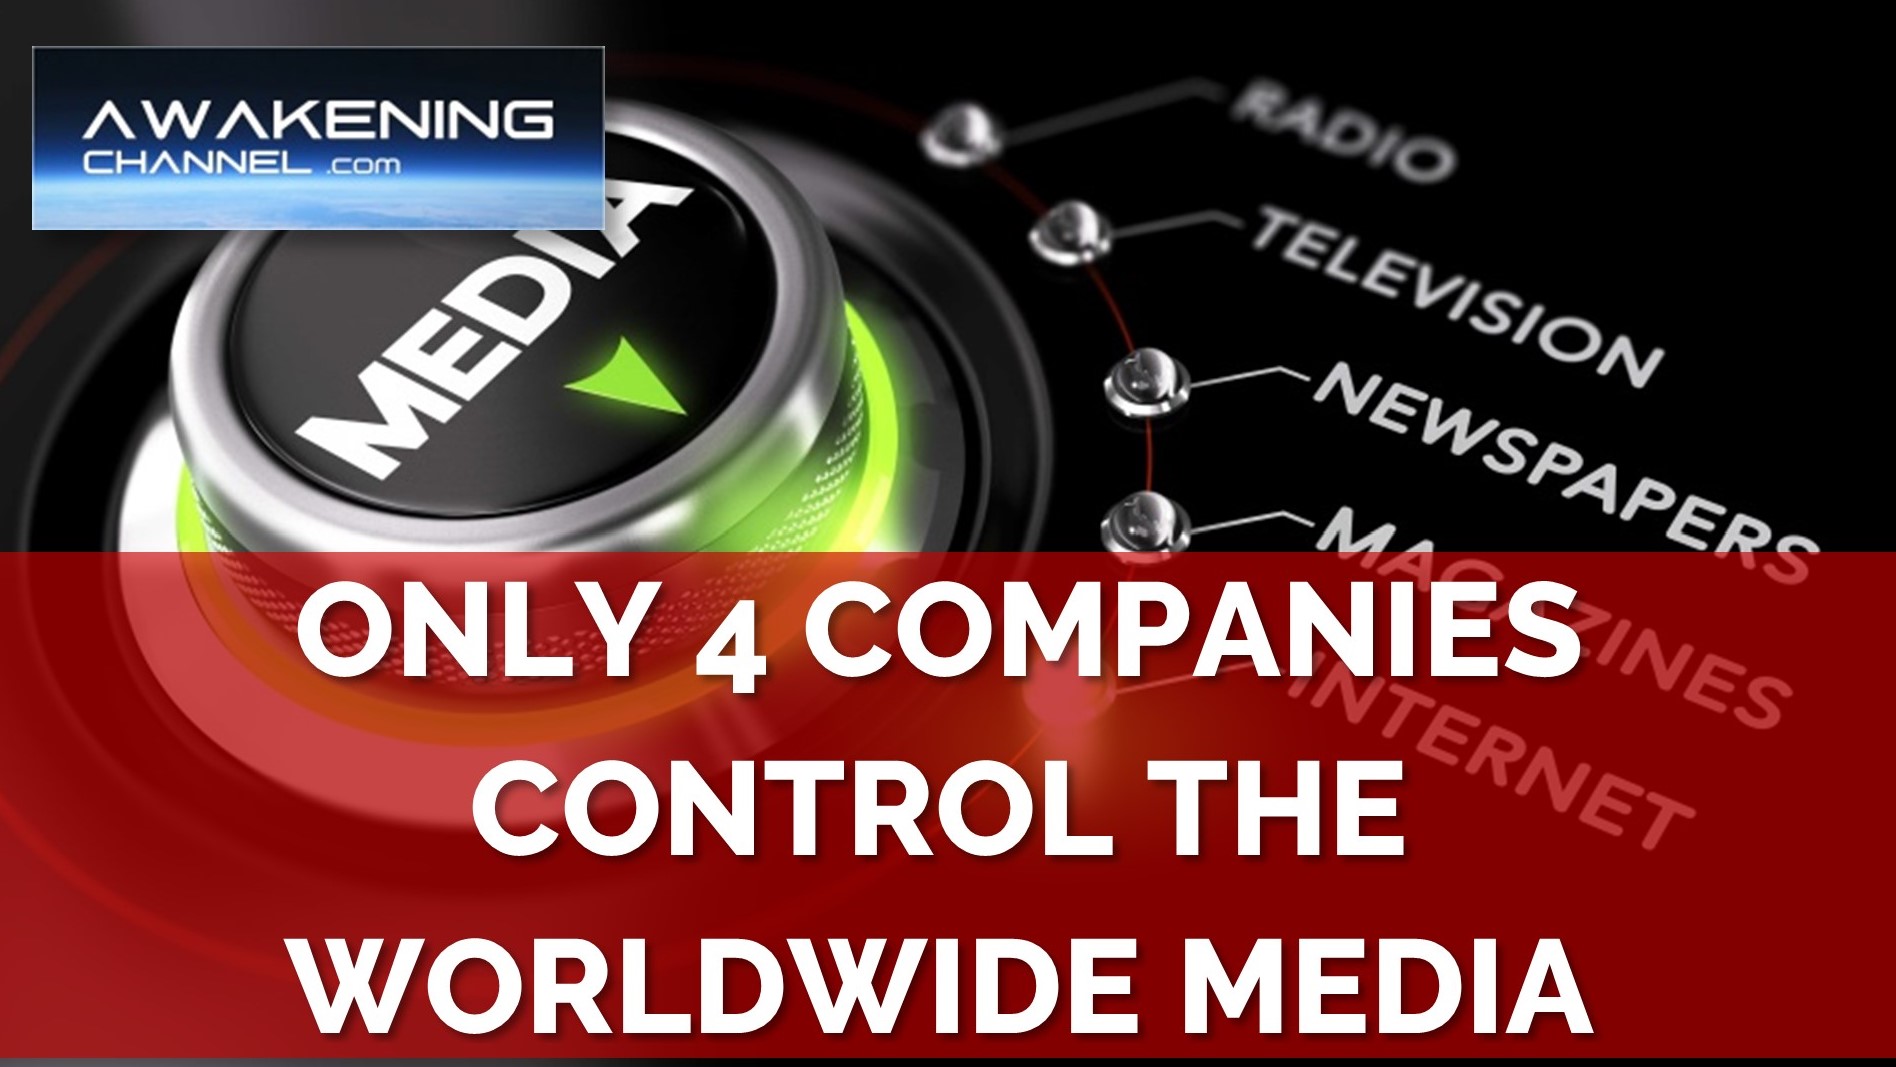 Only 4 Companies Control 80% Of The Worldwide Media